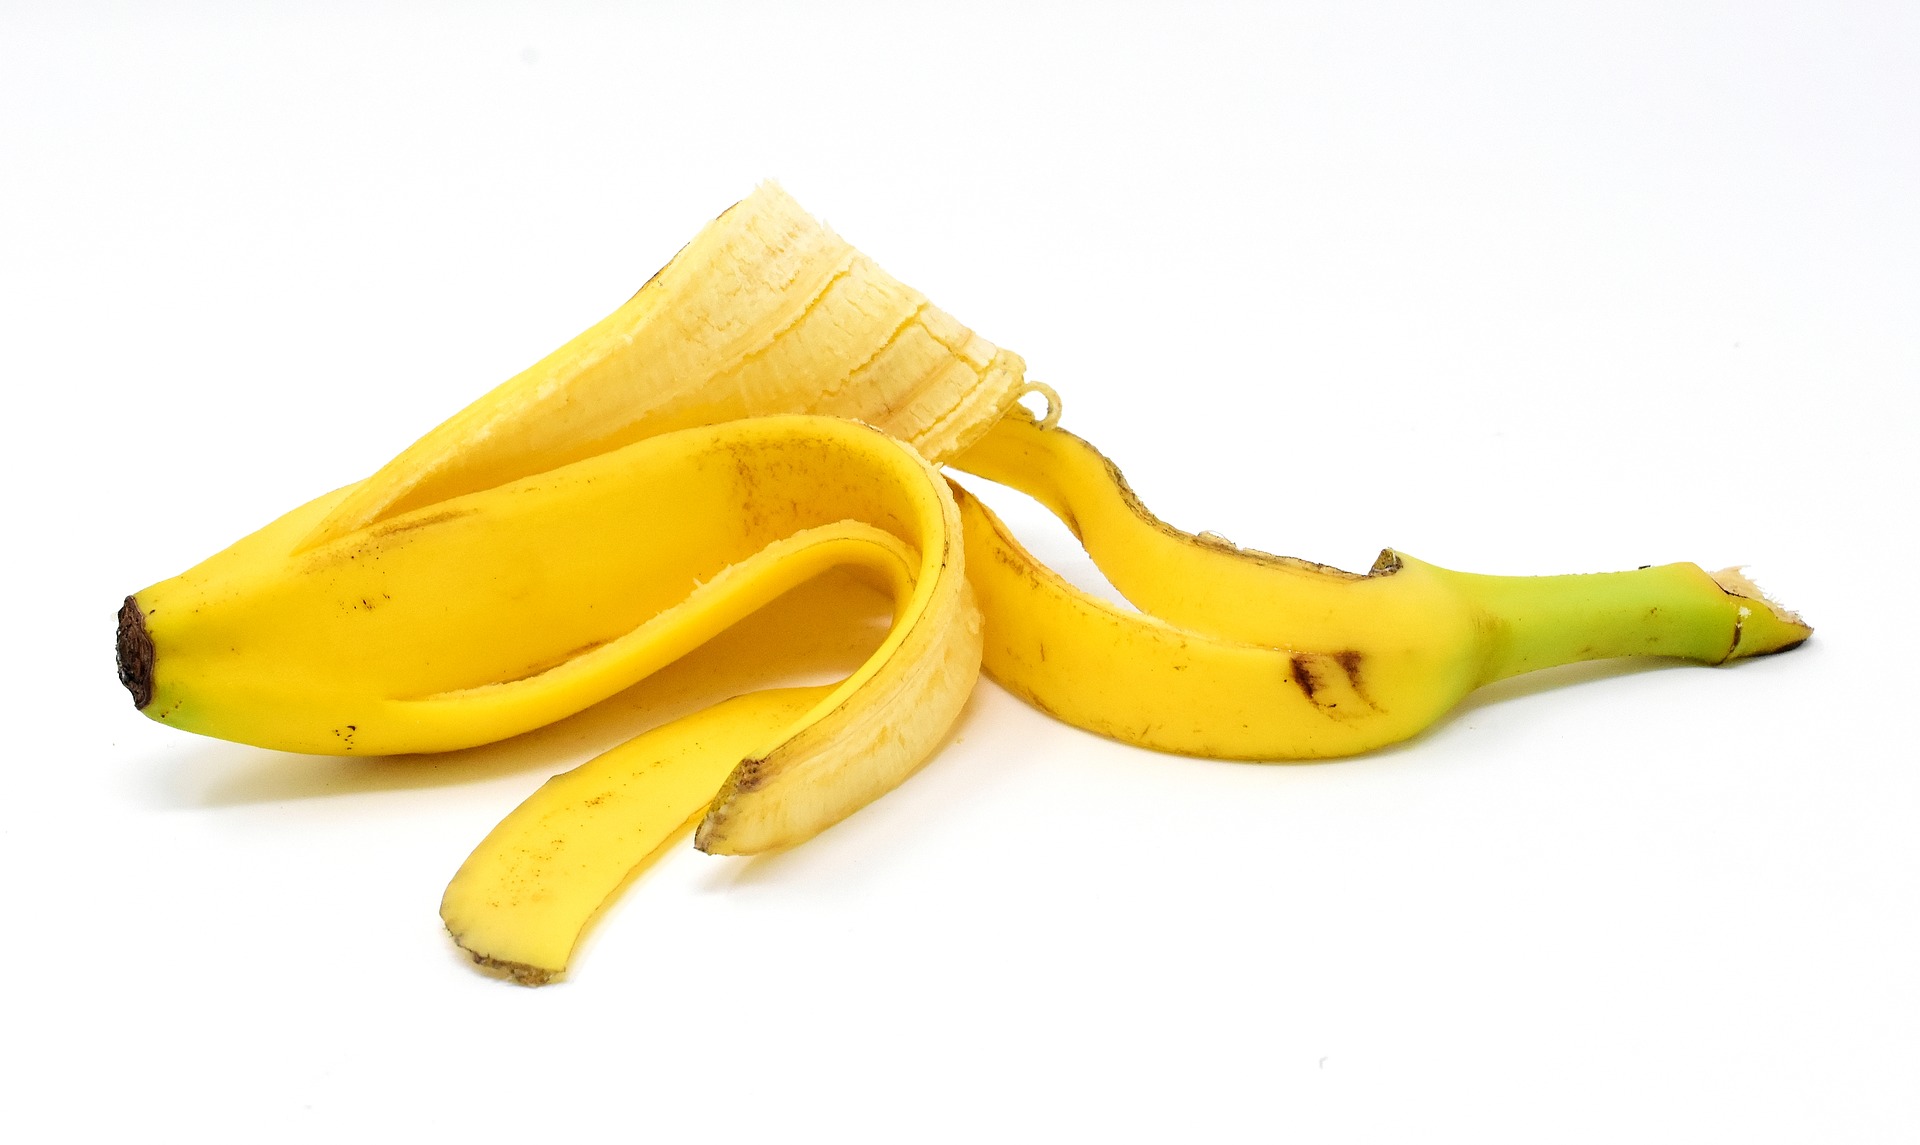 Banan peel (Image by Here and now, unfortunately, ends my journey on Pixabay)